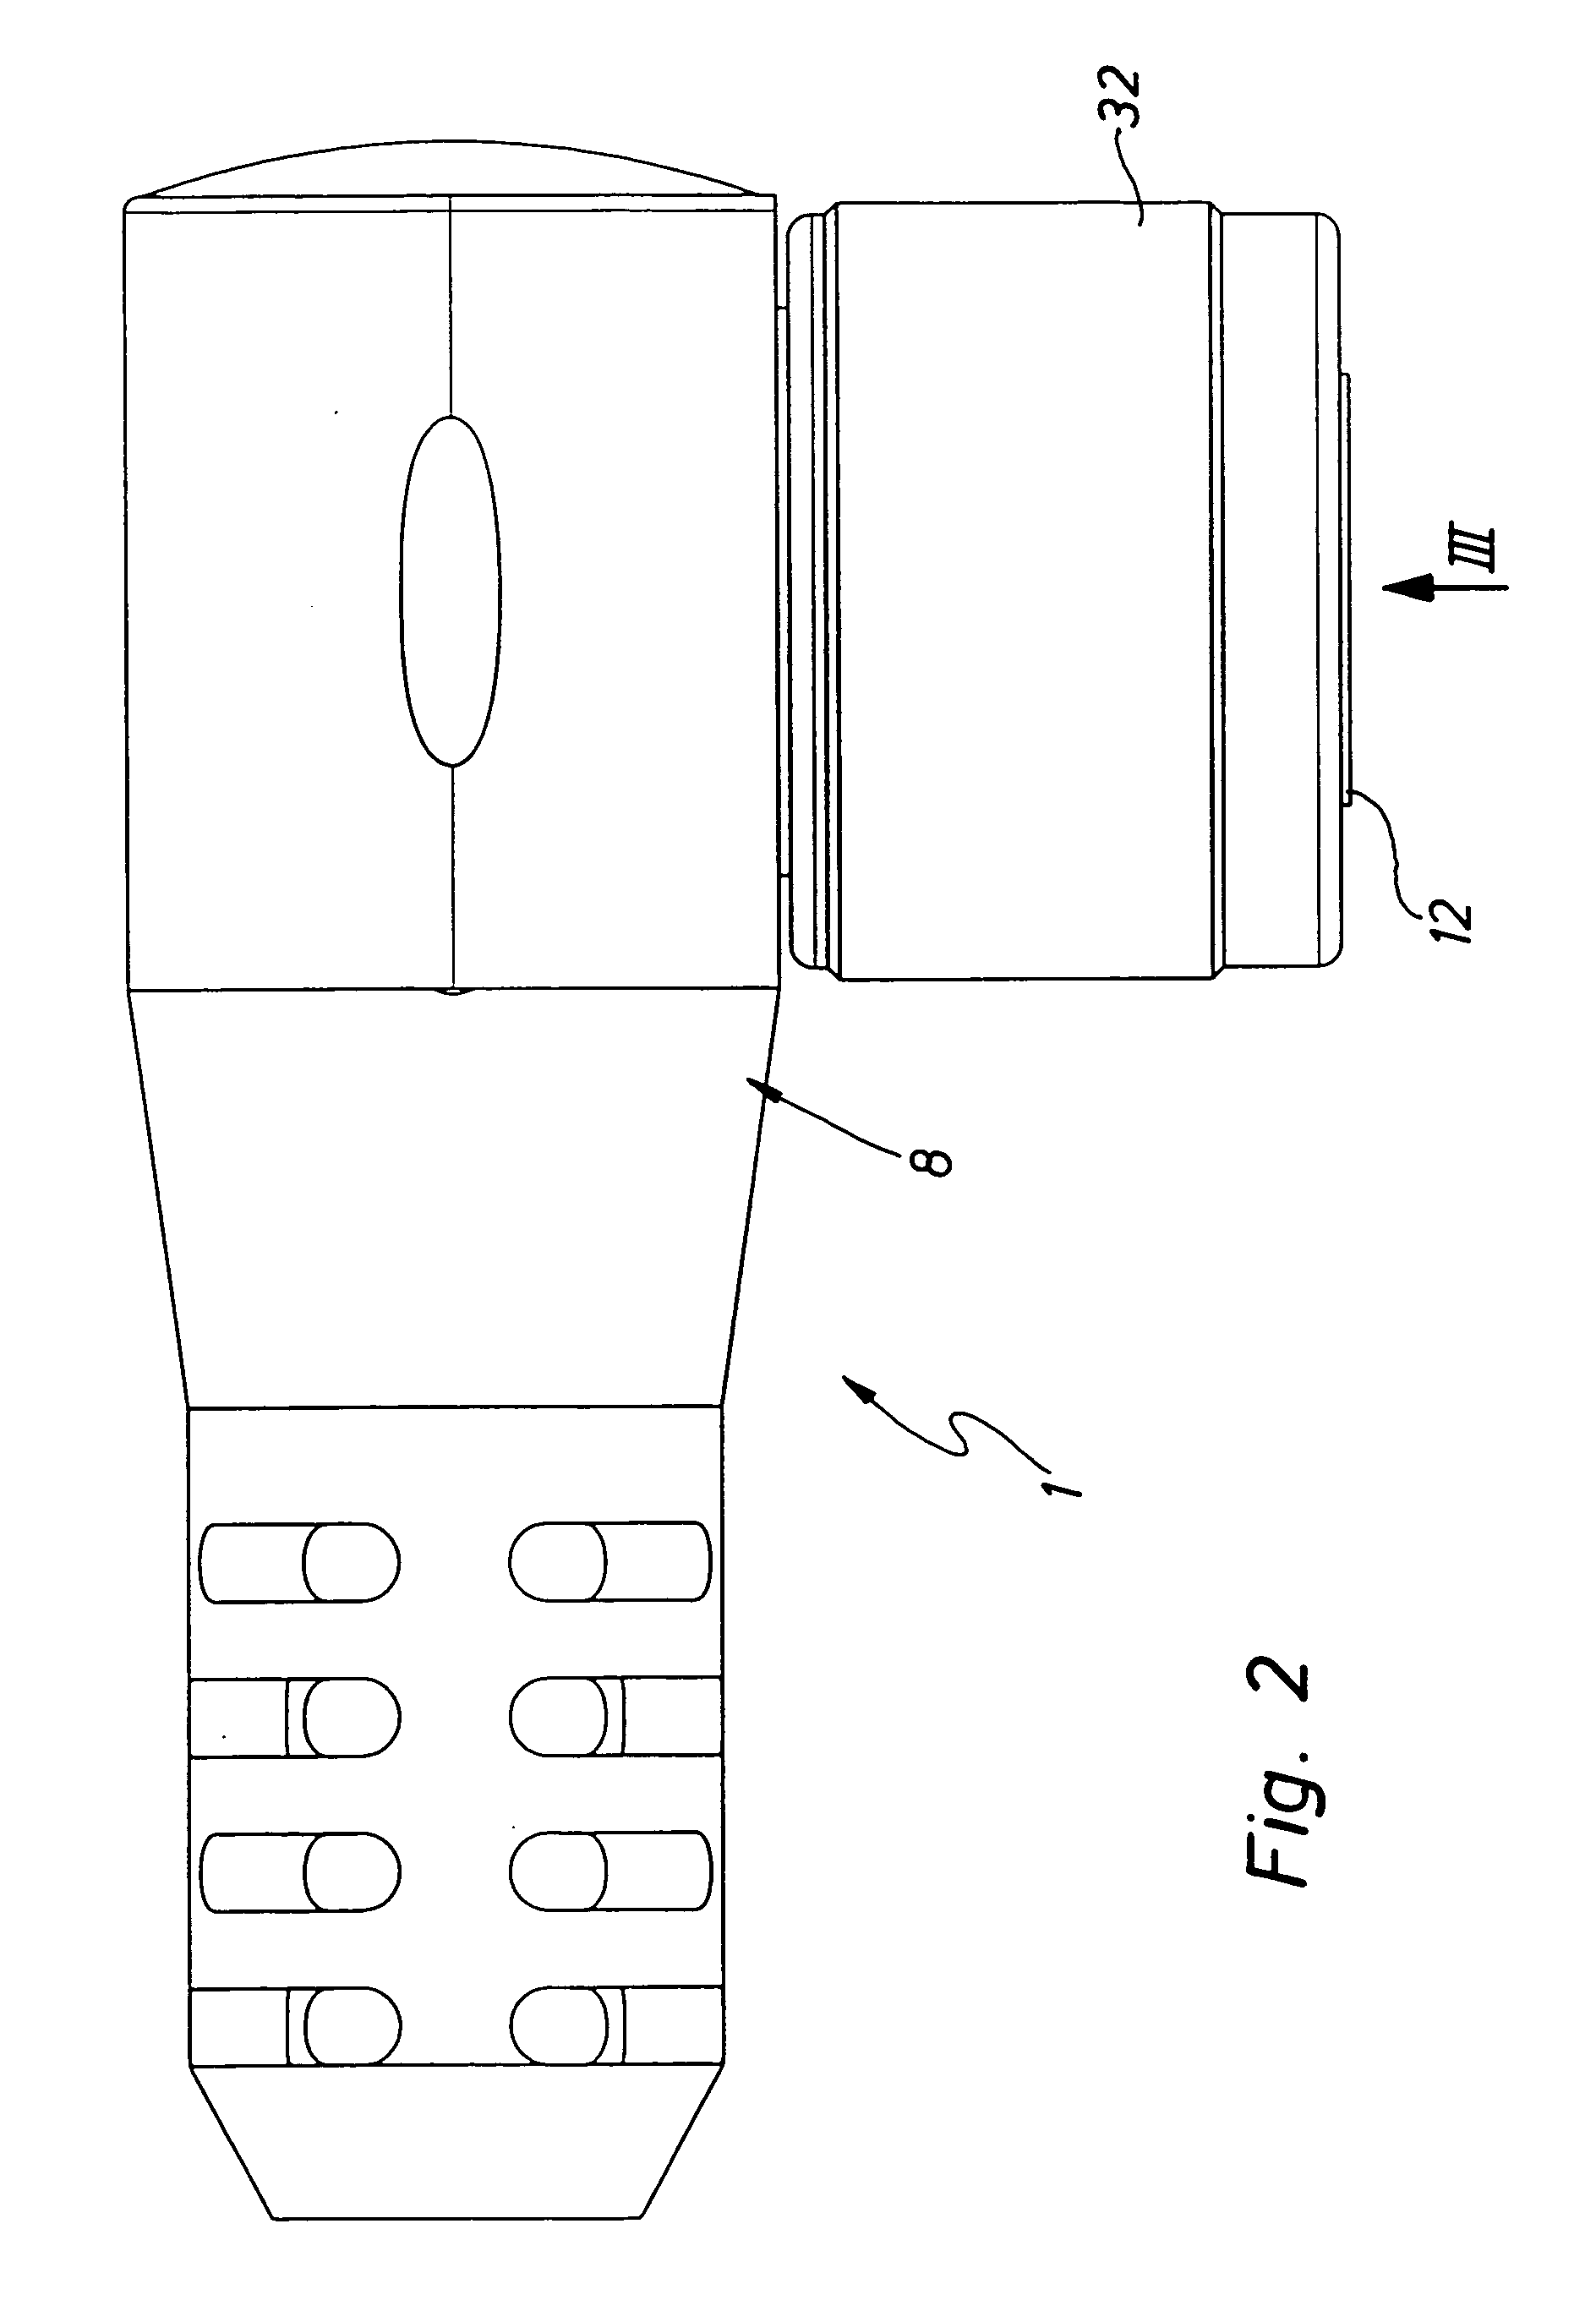 Electromechanical plug device having a rotatable outgoing cable part